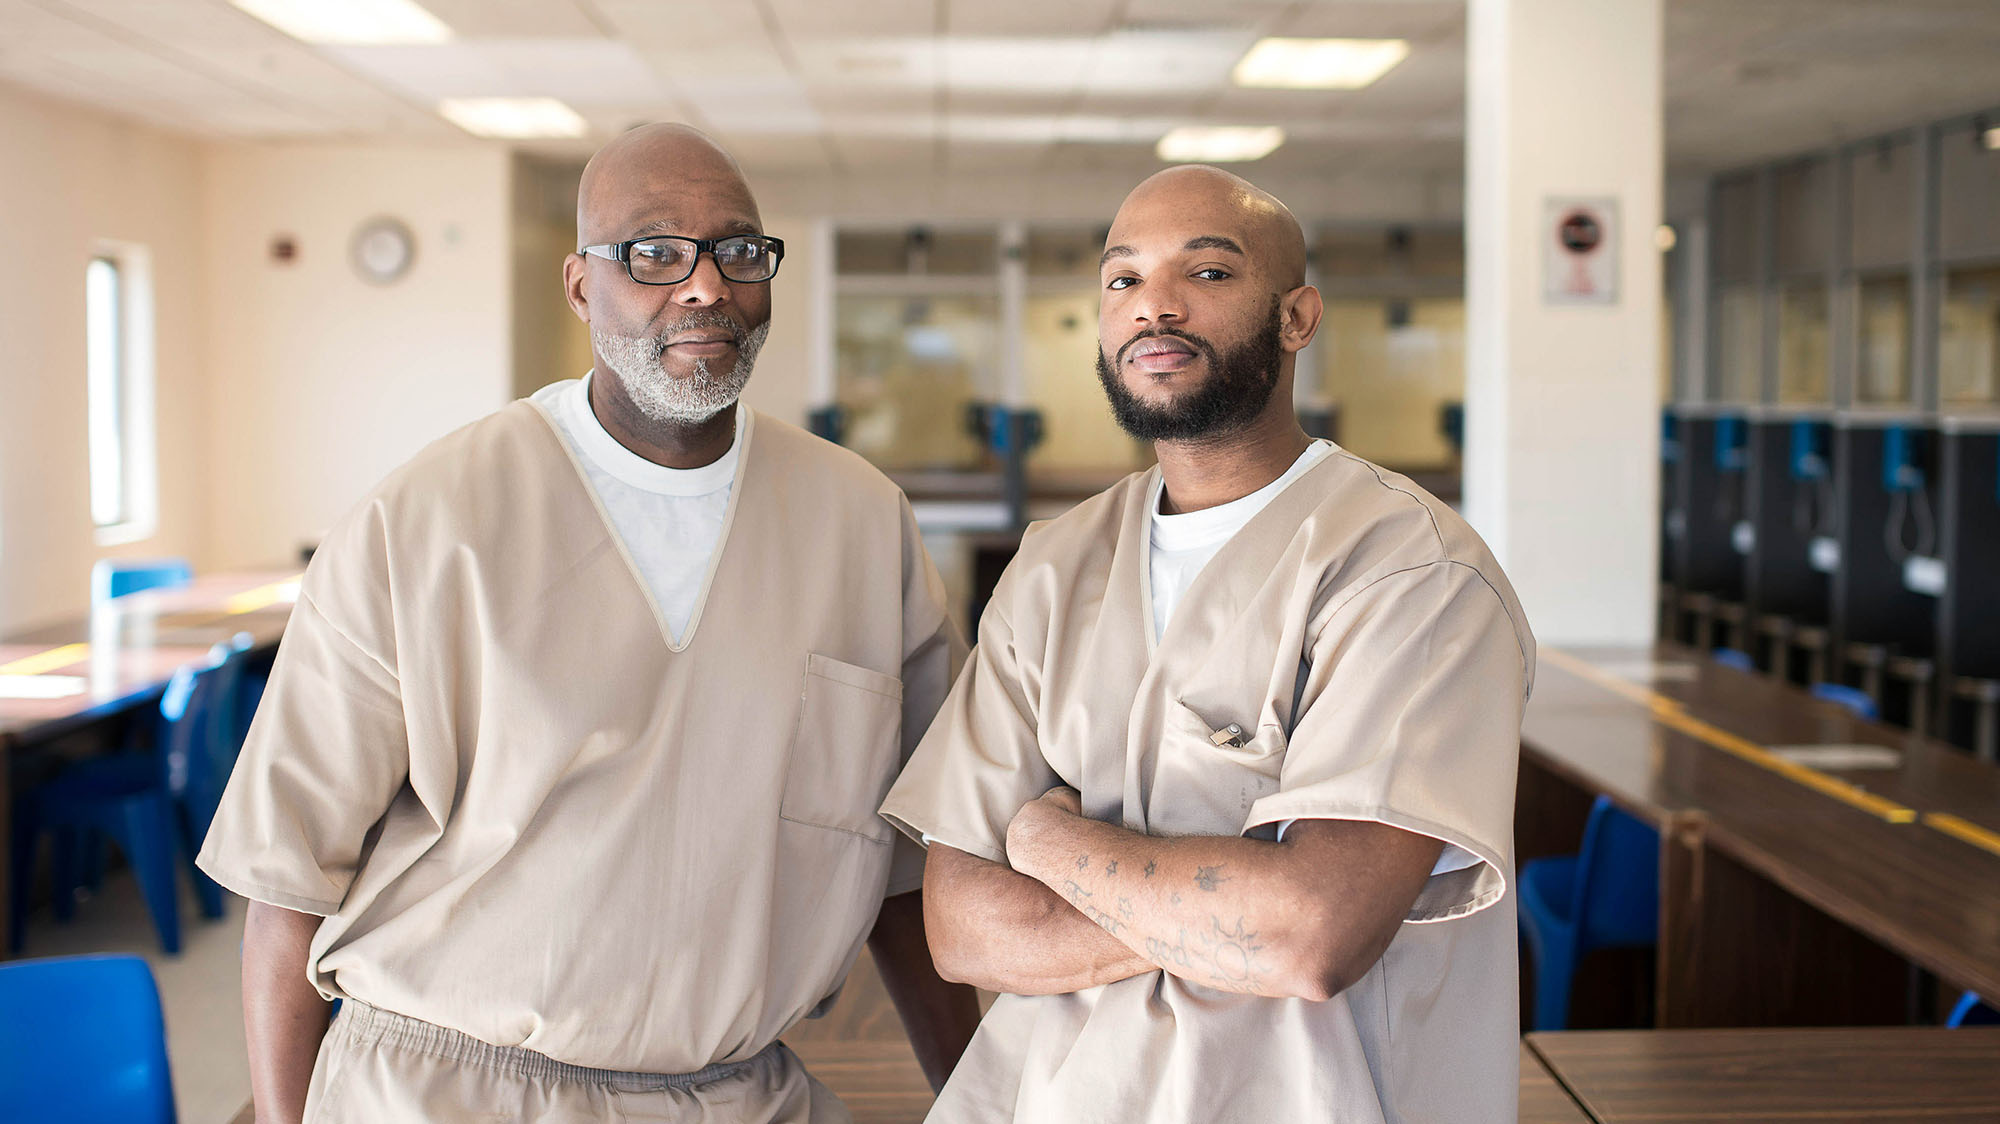 A Connecticut Prison Has a Radical New Plan to Keep Young Inmates From